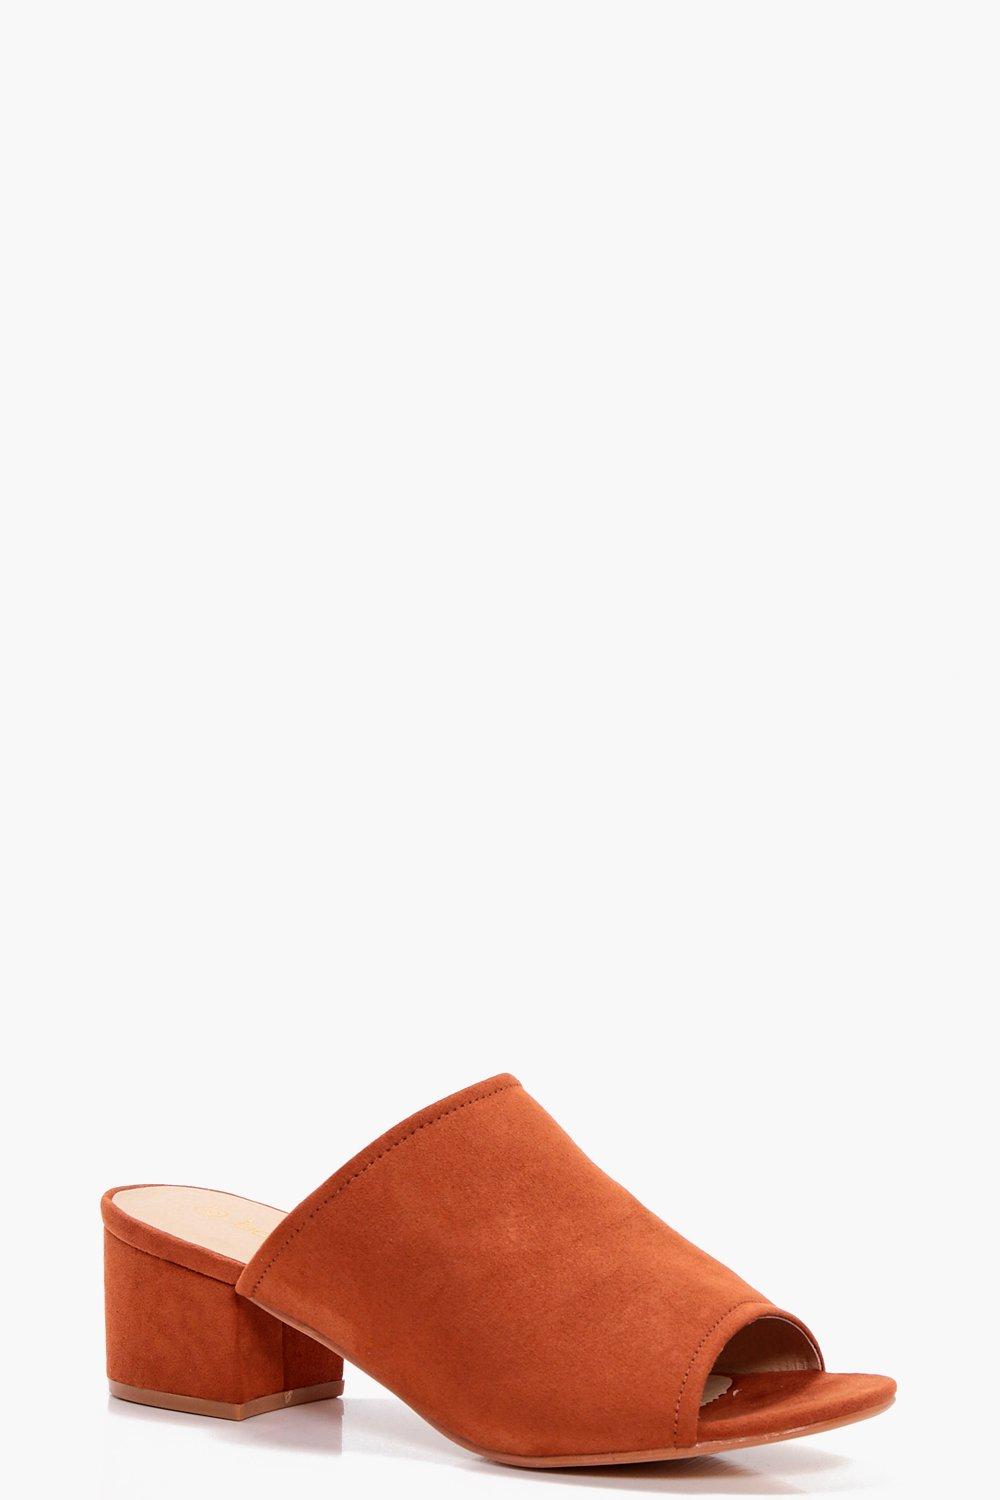 wide fitting mules uk